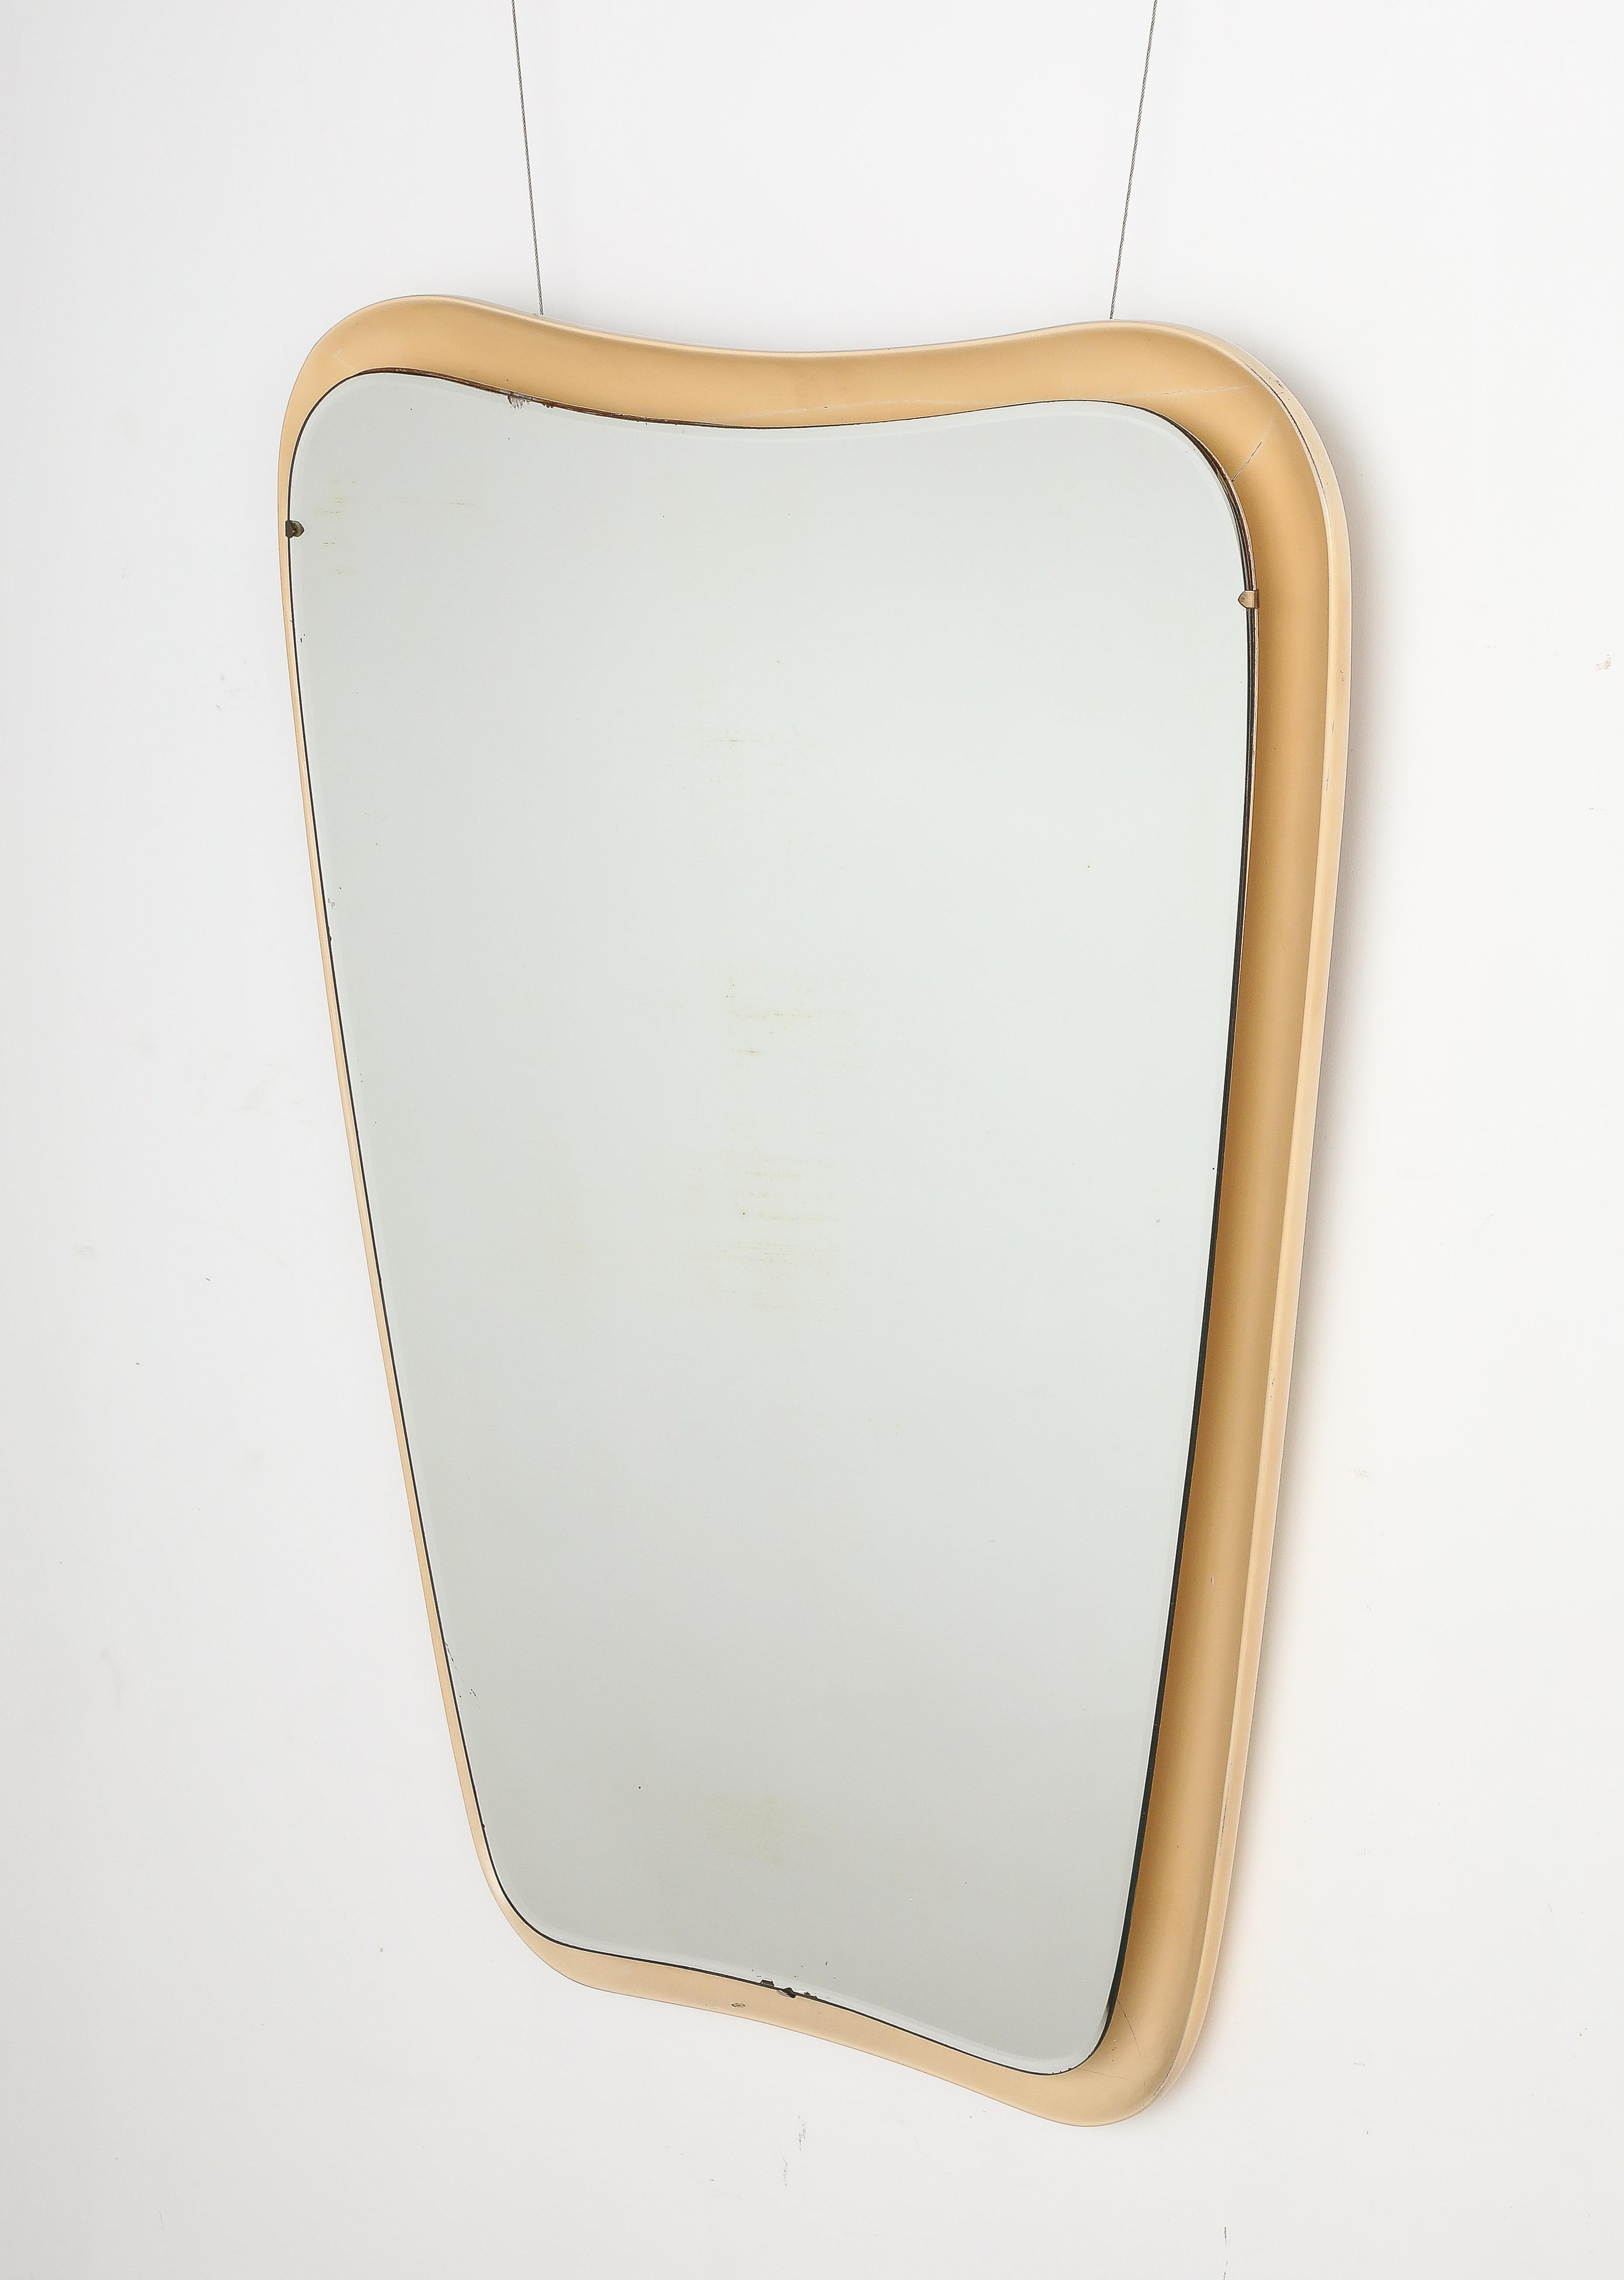 Italian Modernist Lacquered Floating Wall Mirror, Italy, circa 1960  For Sale 7